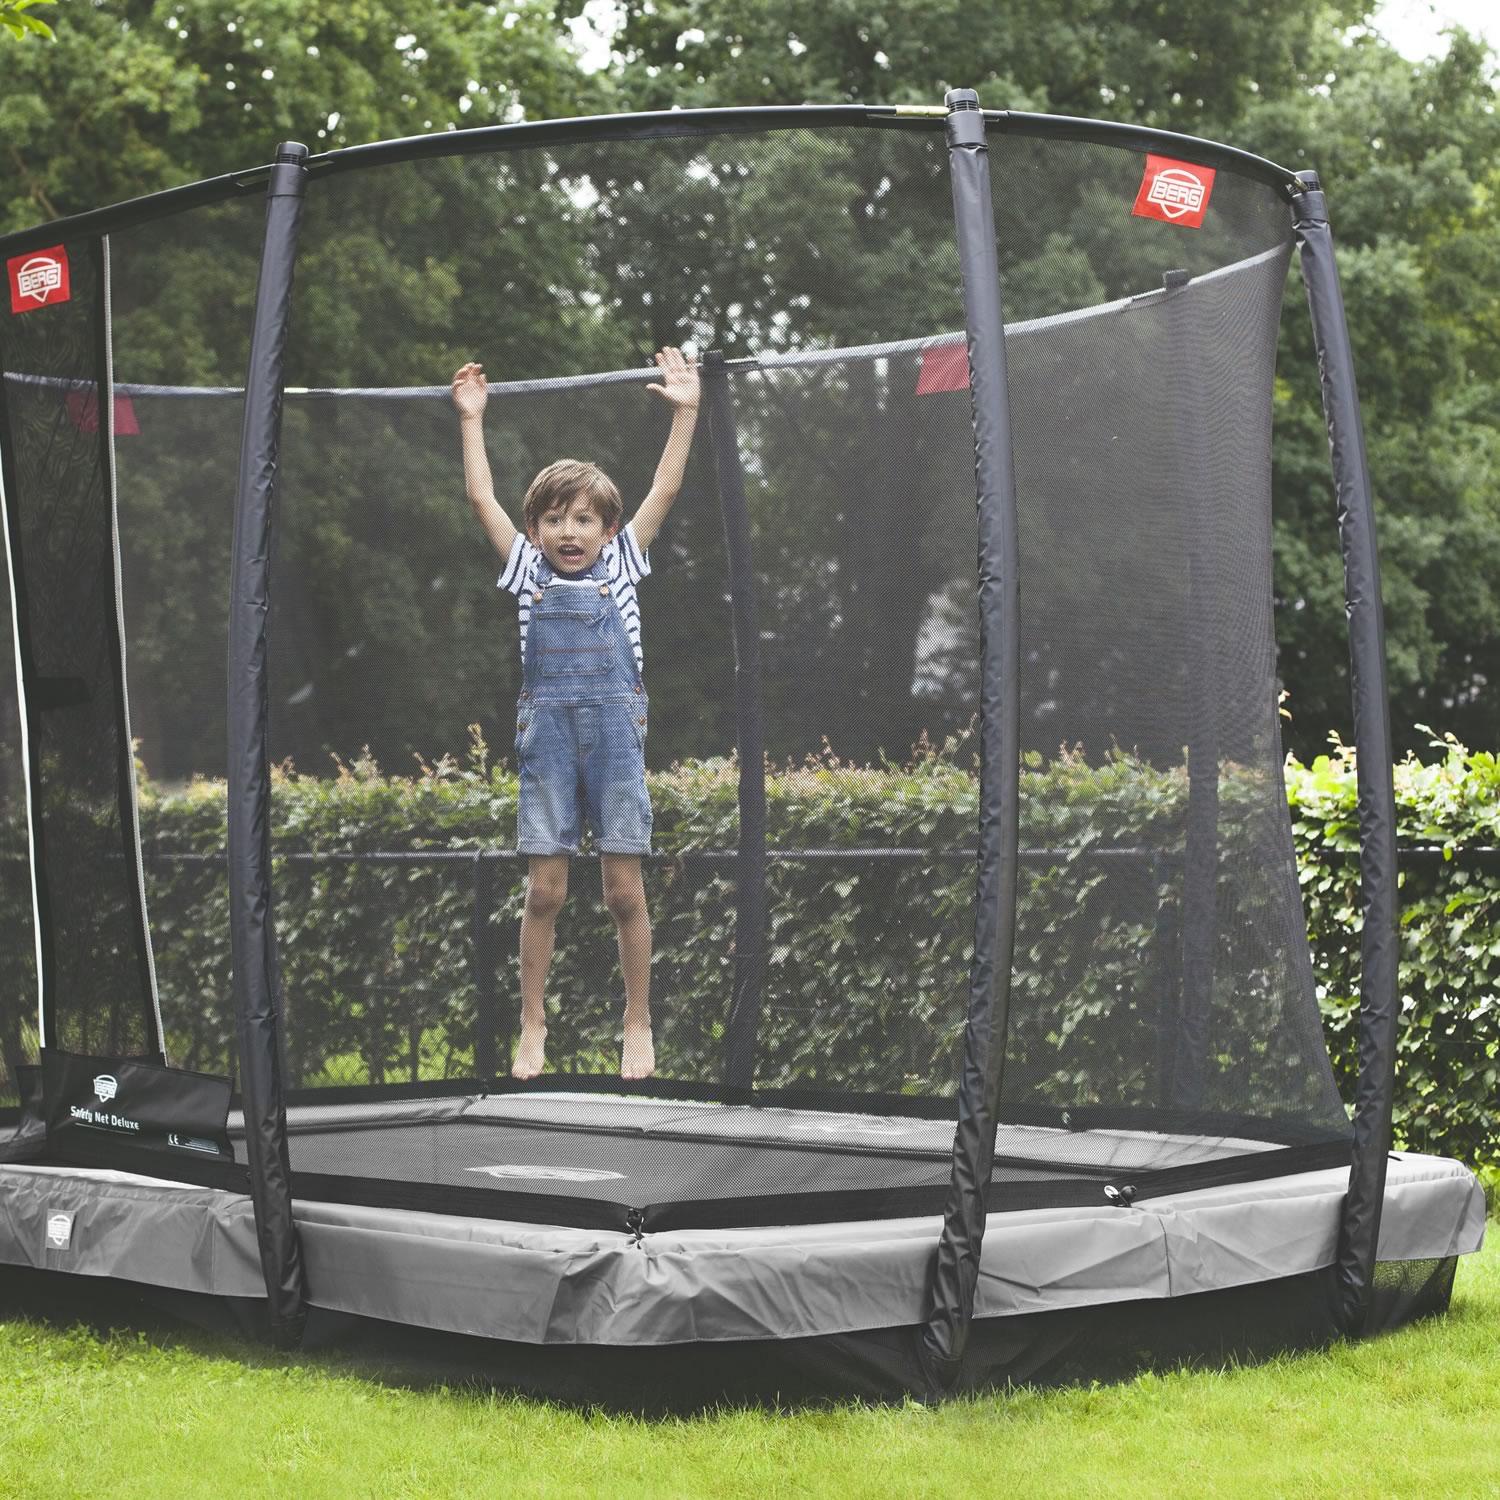 Berg Ultim InGround 330 Black incl. Safety Net Deluxe - Best quality, biggest